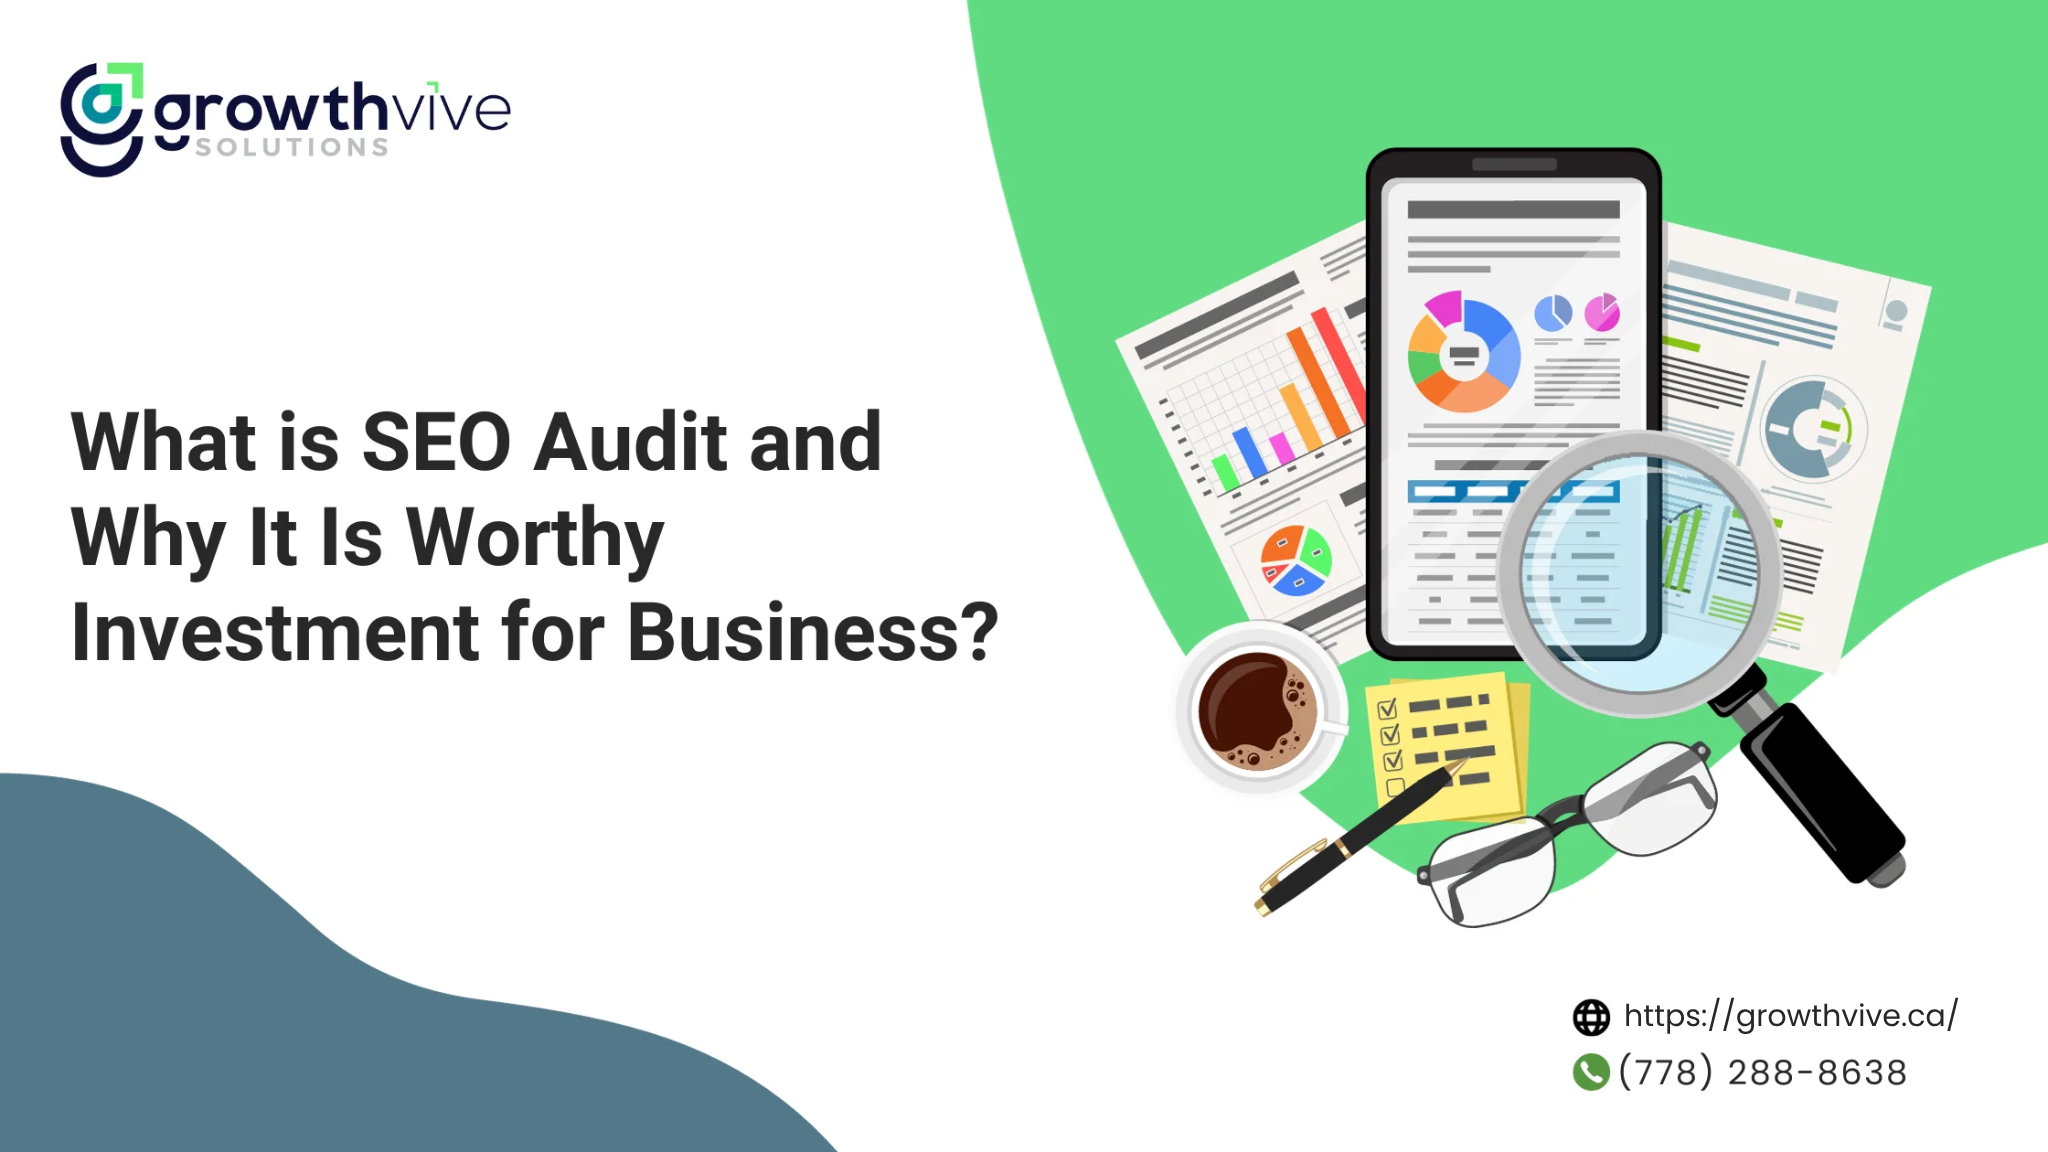 What is SEO Audit and Why It Is Worthy Investment for Business